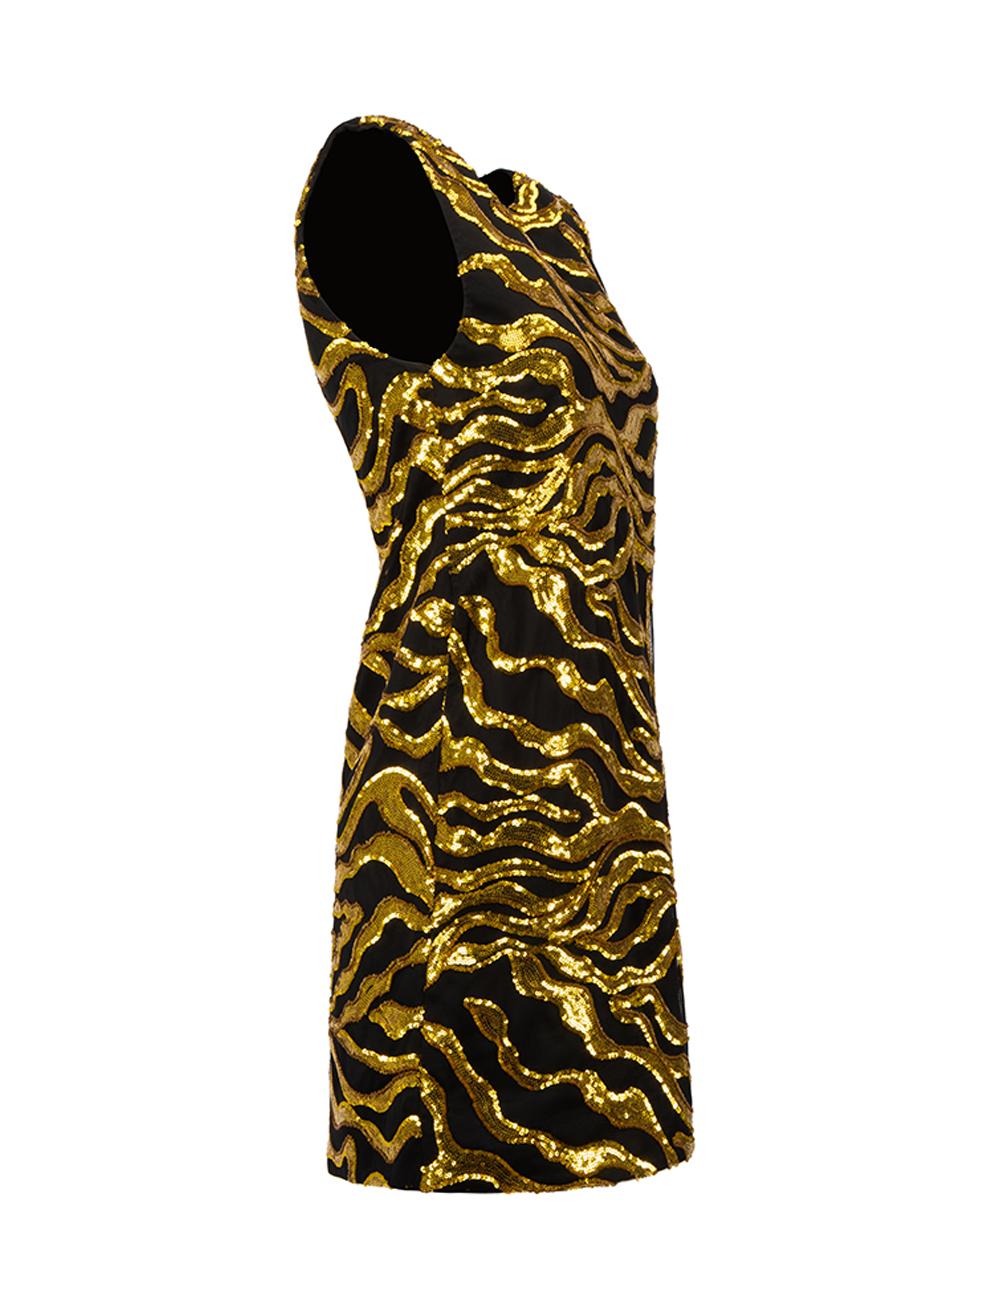 CONDITION is Very good. Hardly any visible wear to dress is evident. There are some pulls to the material to the interior on the right shoulder of this used Halpern designer resale item. 
 
 Details
  Black
 Polyester
 Mini dress
 Gold sequins